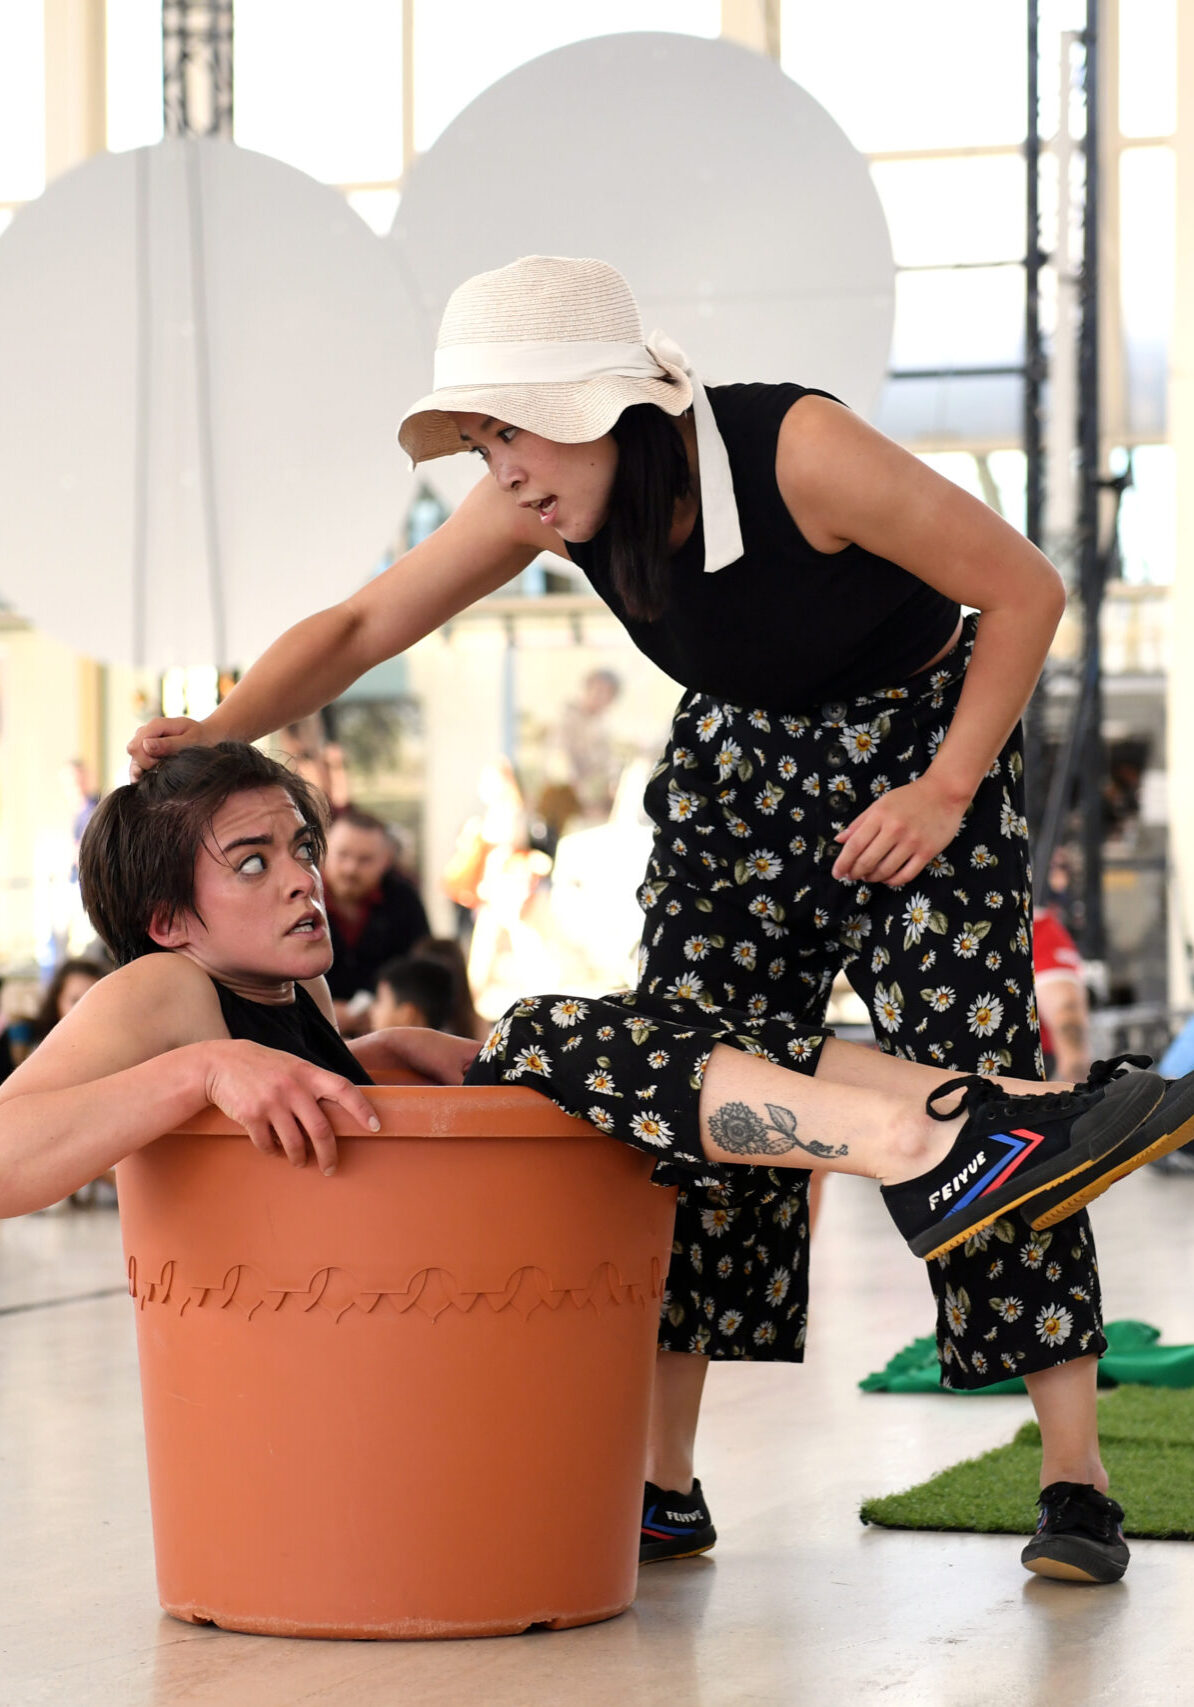 A photo of two dancers, one fallen into a large flower pot and the other leaning over them.